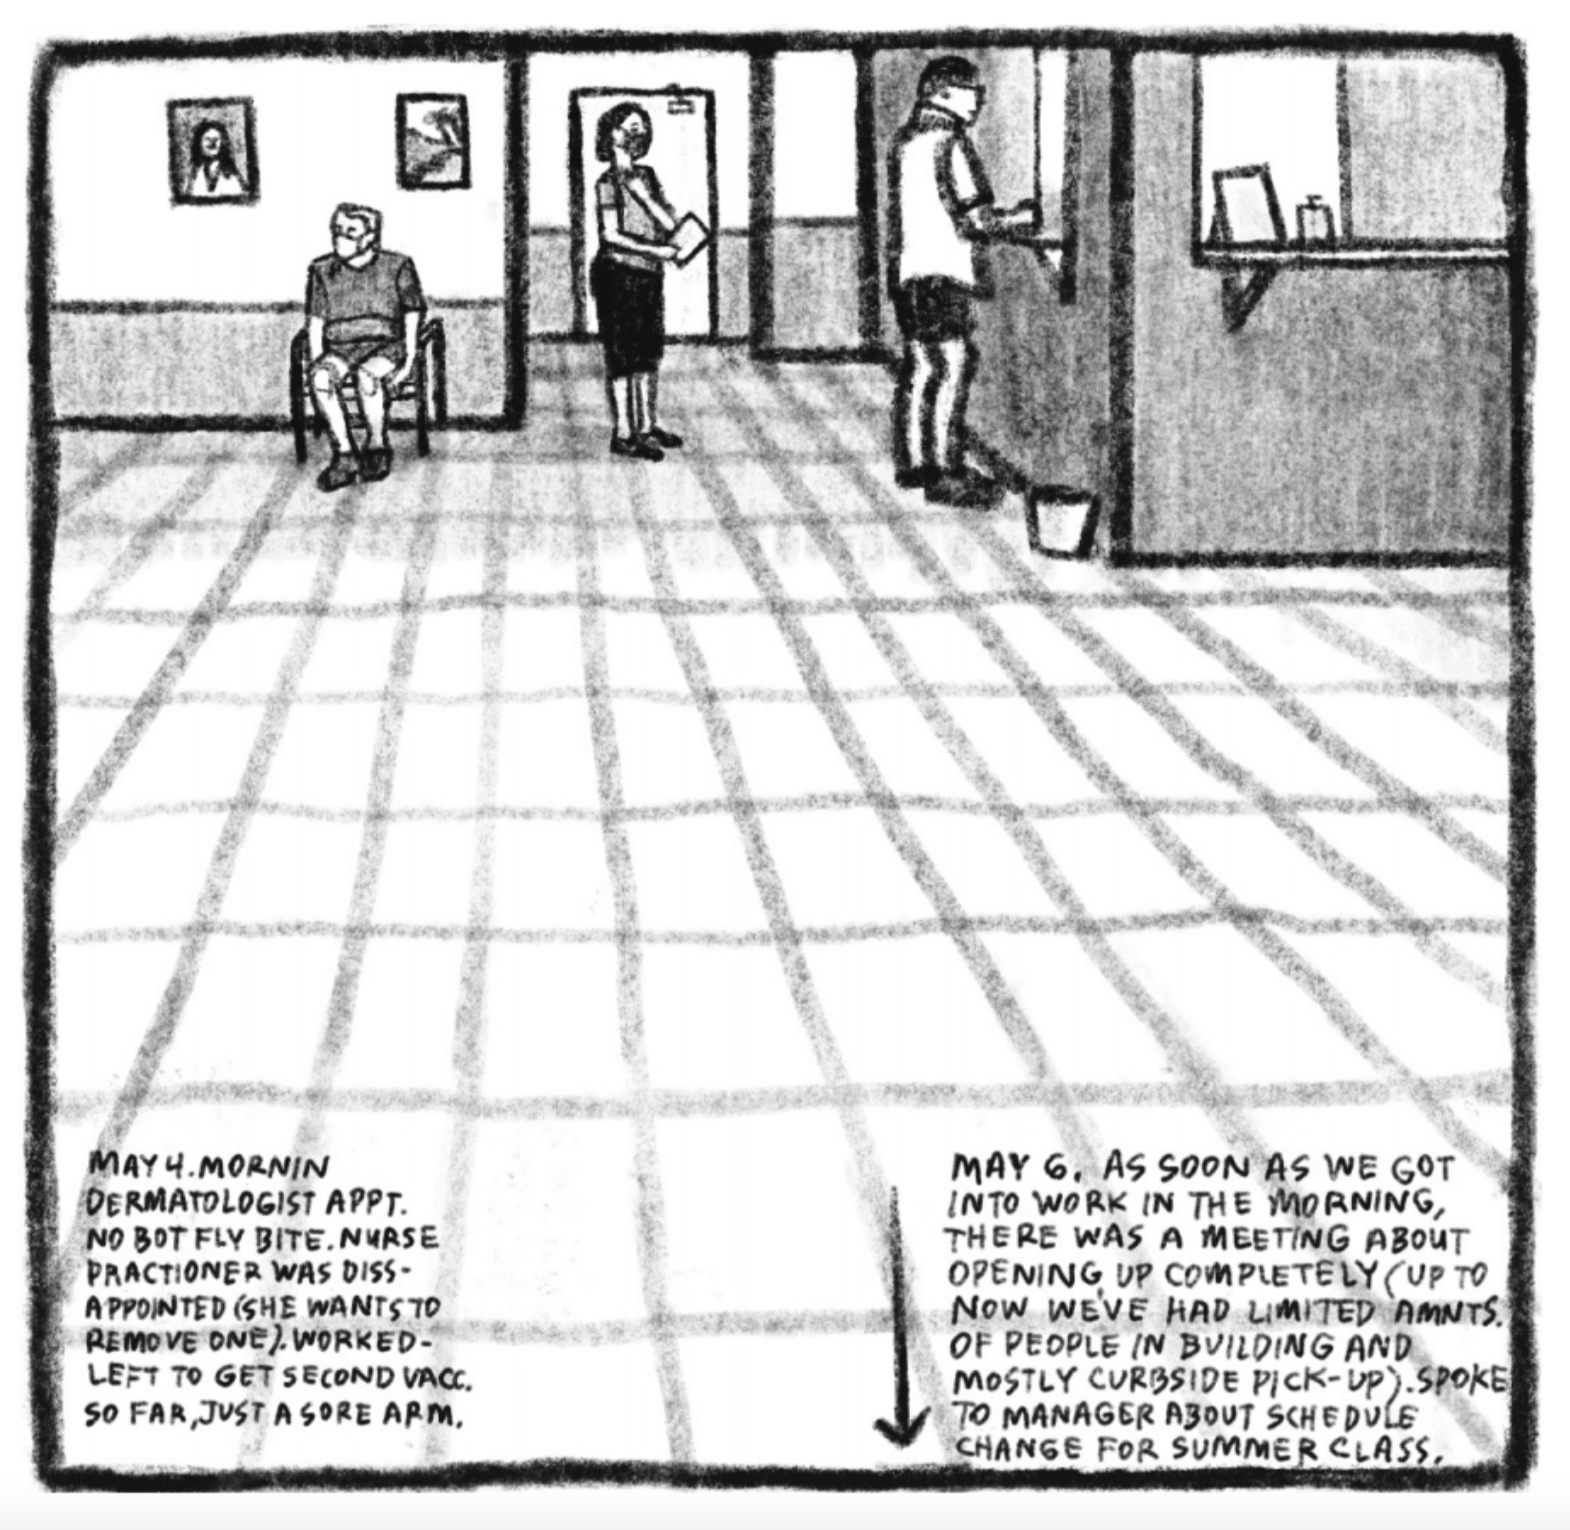 A view of a doctor's office lobby with a high horizon line. The floor, which takes up most of the panel space, is tiled. One person waits in a chair. One person waits in line, while another stands at the receptionist's window. Two of the three are wearing masks.

"May 4. Mornin dermatologist appointment. No bot fly bite. Nurse practitioner was disappointed (she wants to remove one). Worked - left to get second vaccine. So far, just a sore arm."

An arrow in the center-bottom of the panel points down to the next panel. Next to that is another caption: "May 6. As soon as we got into work in the morning, there was a meeting about opening up completely (up to now we've had limited amounts of people in building and mostly curbside pick-up). Spoke to manager about schedule change for summer class."